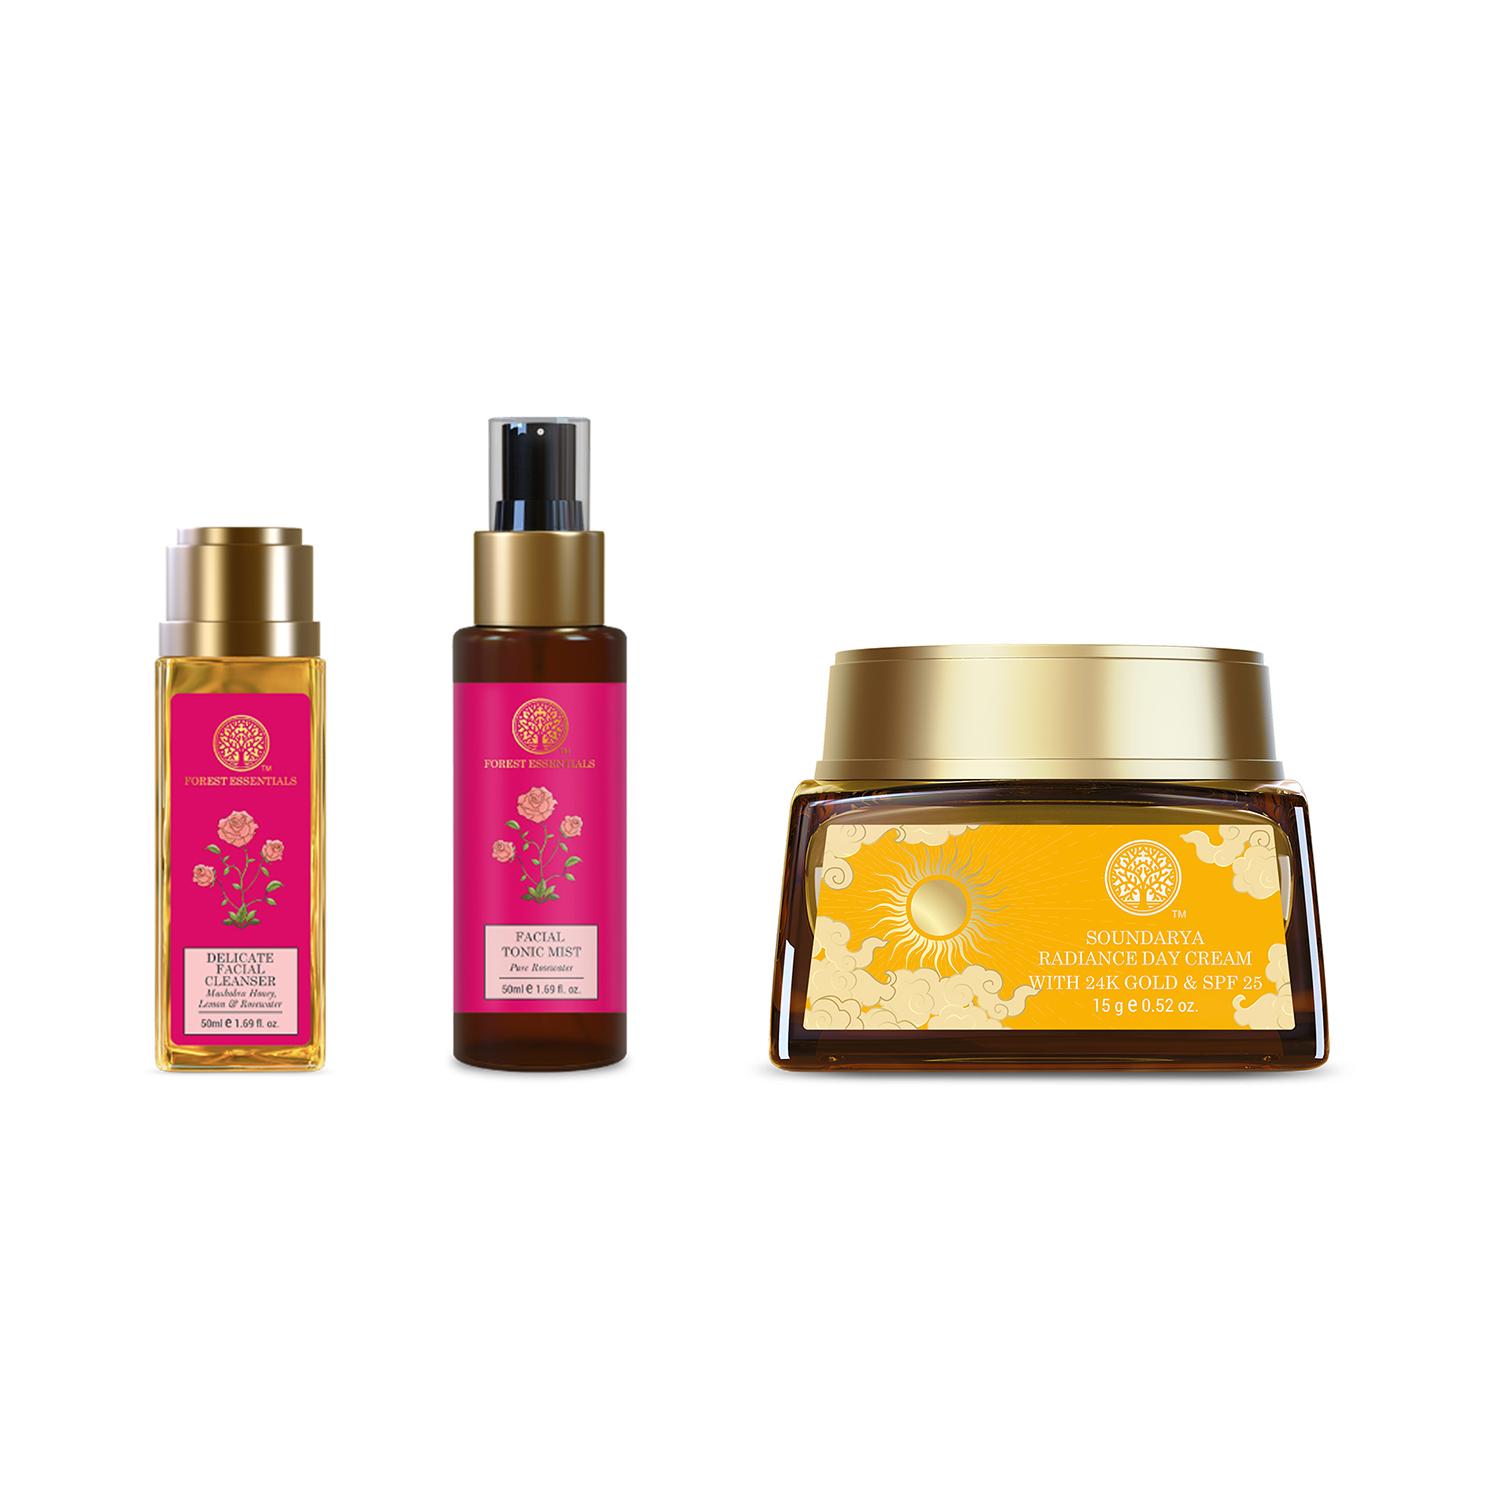 Forest Essentials | Forest Essentials 3-Step Radiance Mini Facial Ritual, Purified, Protected, & Radiant Skin